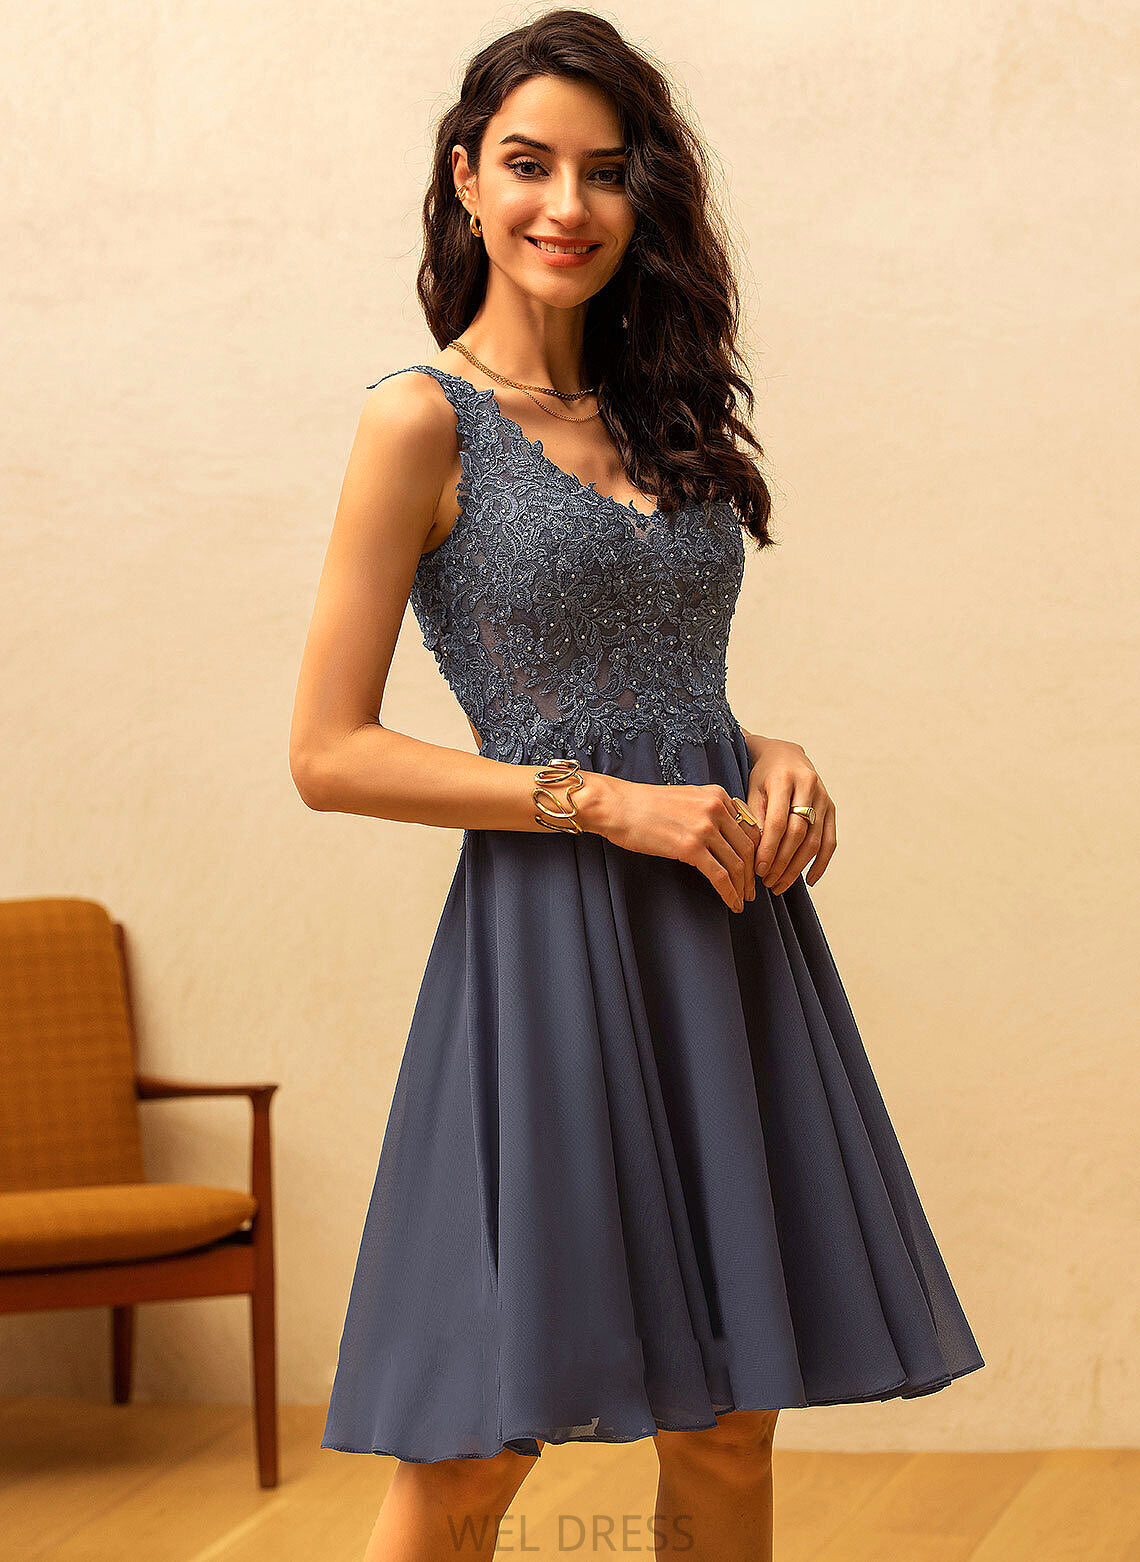 Homecoming Lace With A-Line Beading Homecoming Dresses Lizeth V-neck Dress Knee-Length Chiffon